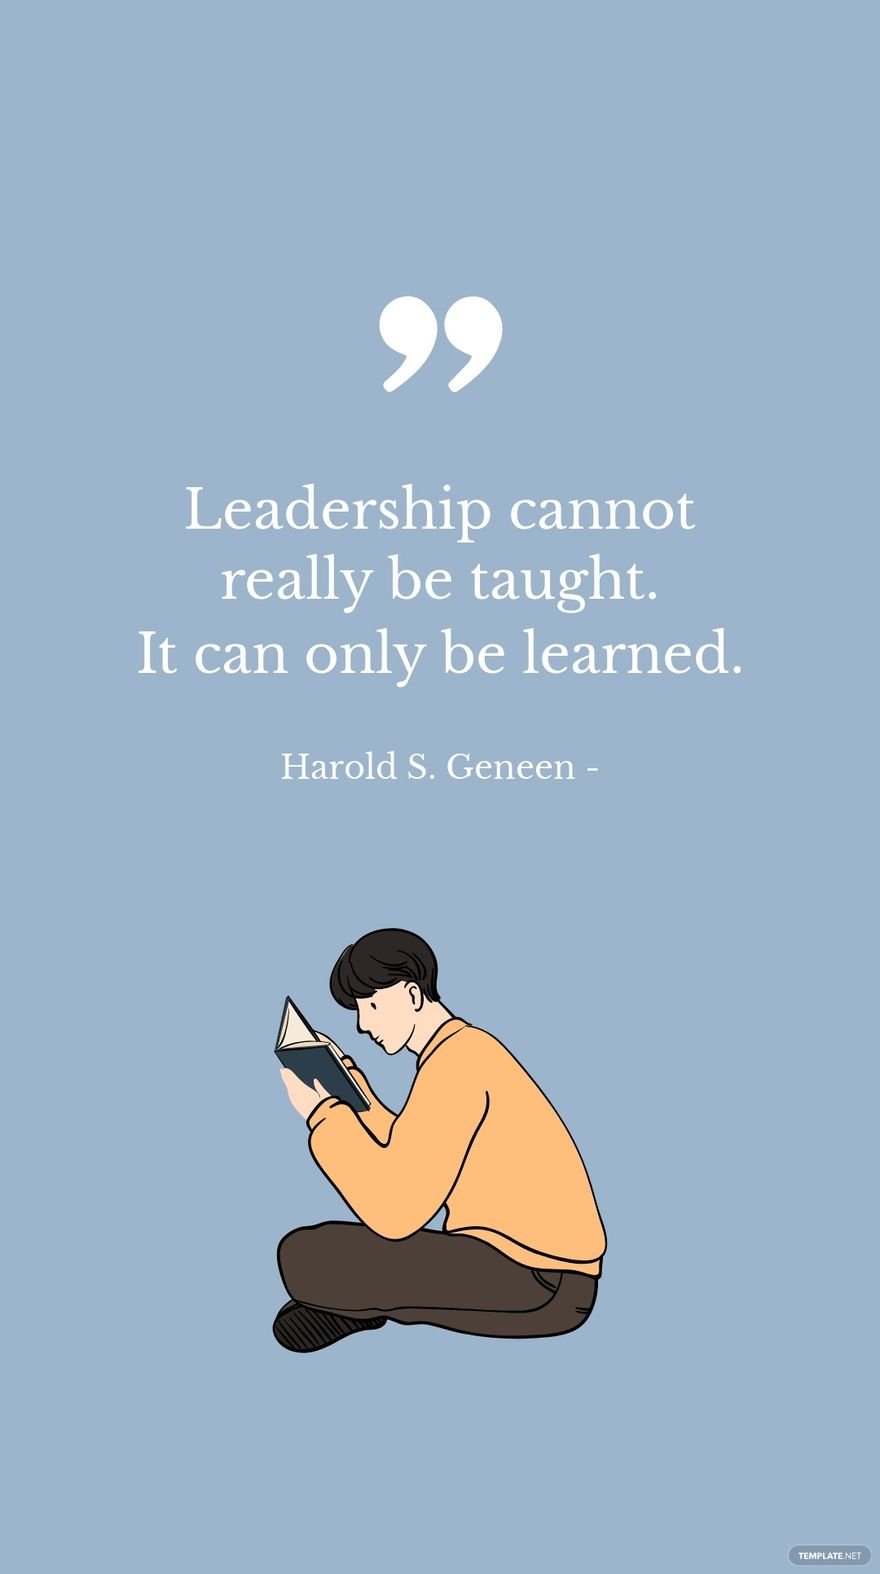 Free Harold S. Geneen - Leadership cannot really be taught. It can only be learned. in JPG